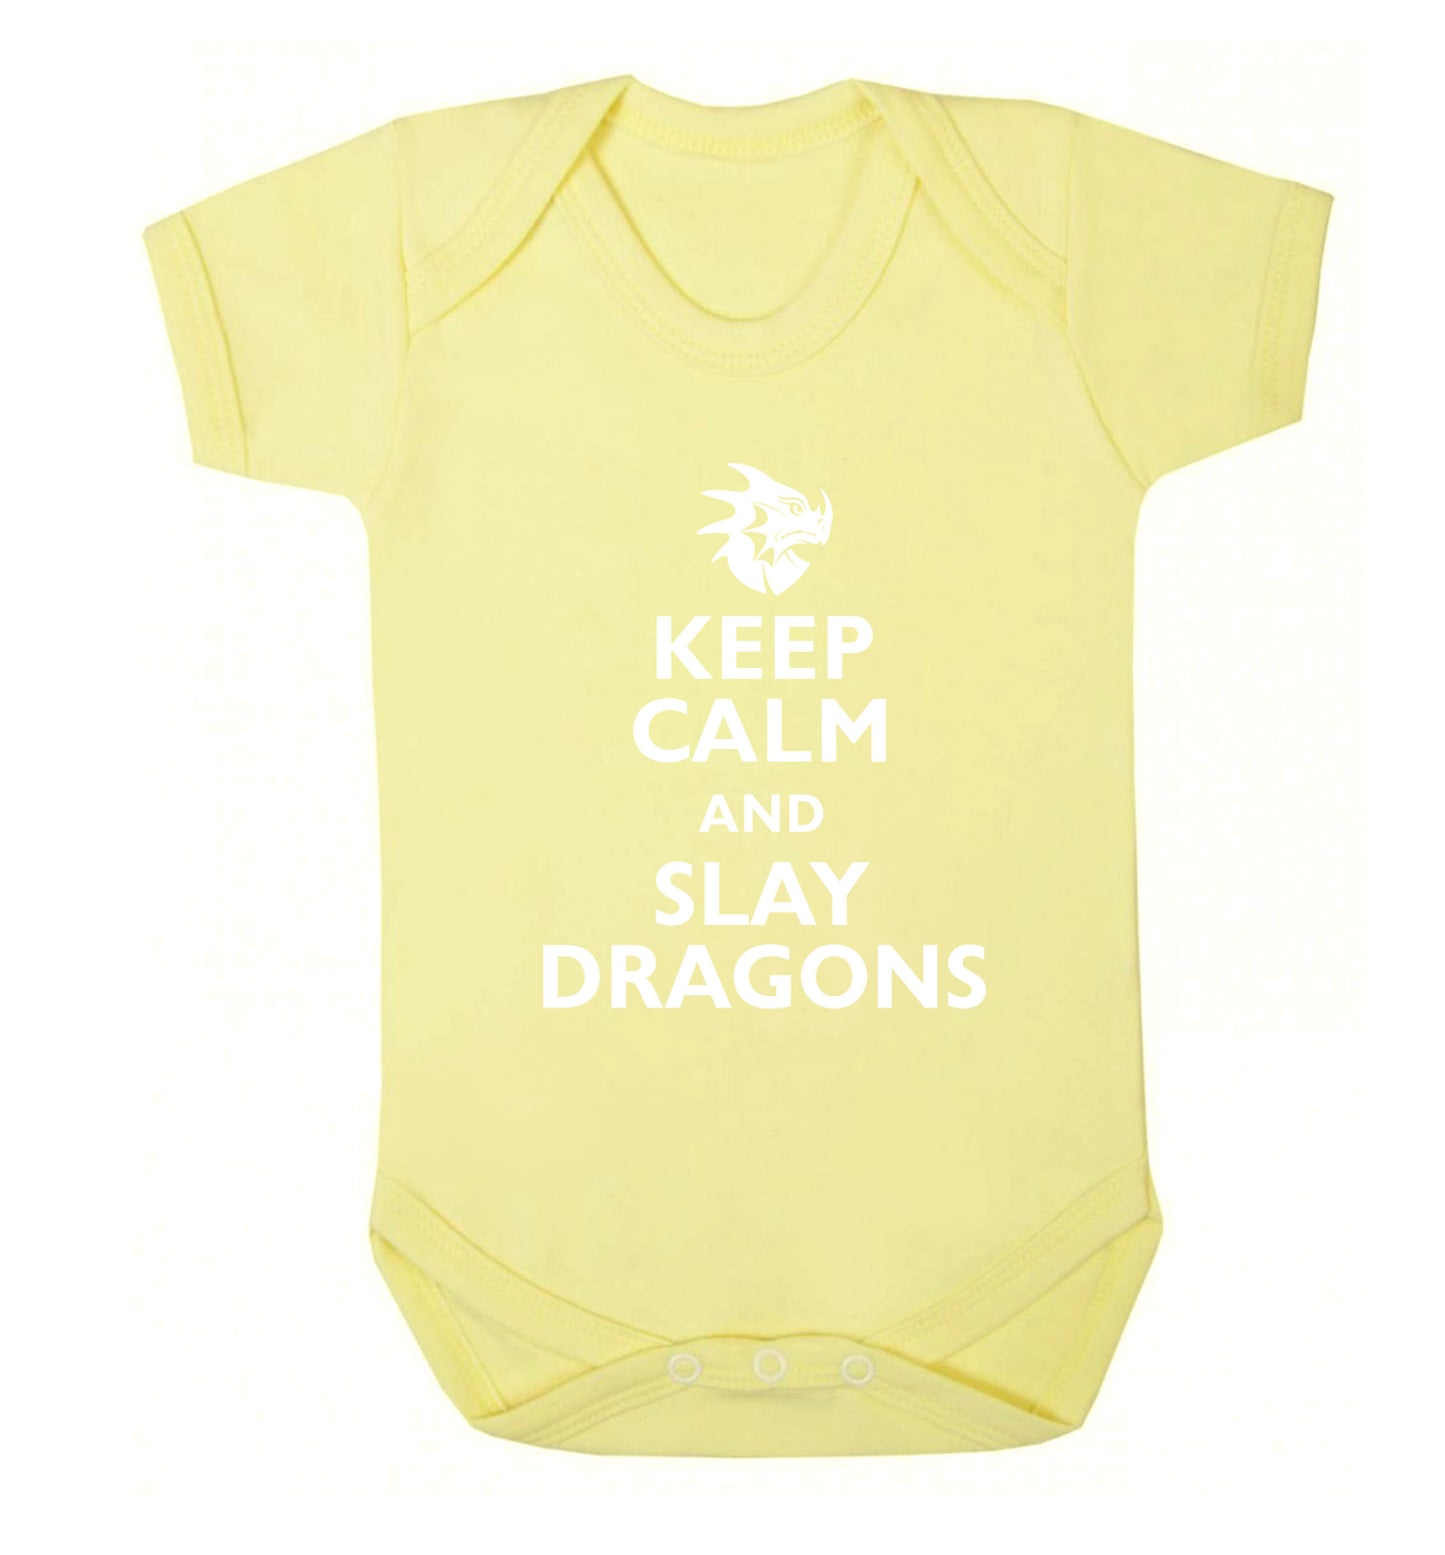 Keep calm and slay dragons Baby Vest pale yellow 18-24 months